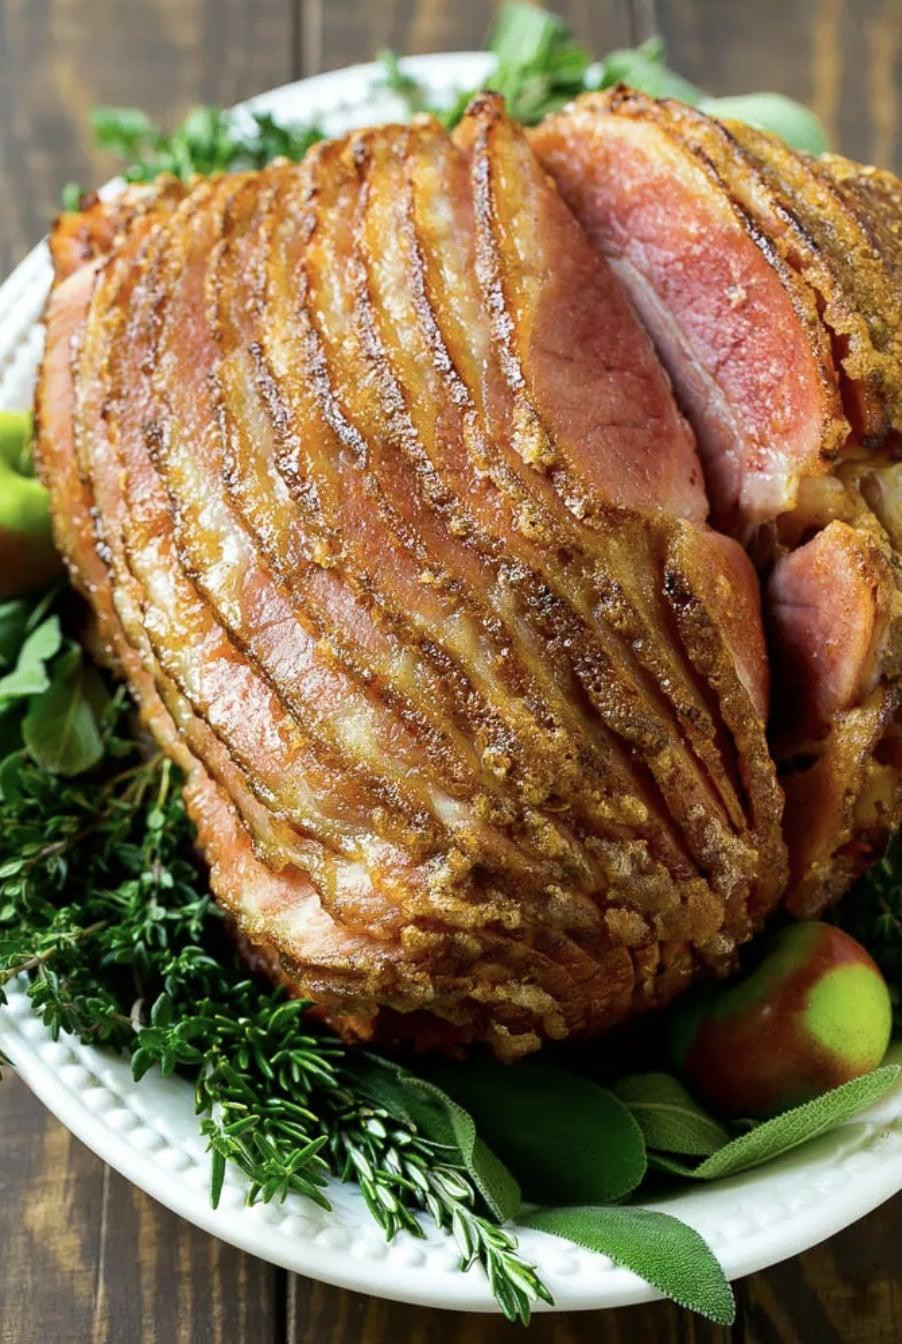 Recipes For Easter Ham
 The 35 Best Ham Recipes For a Mouthwatering Easter Dinner